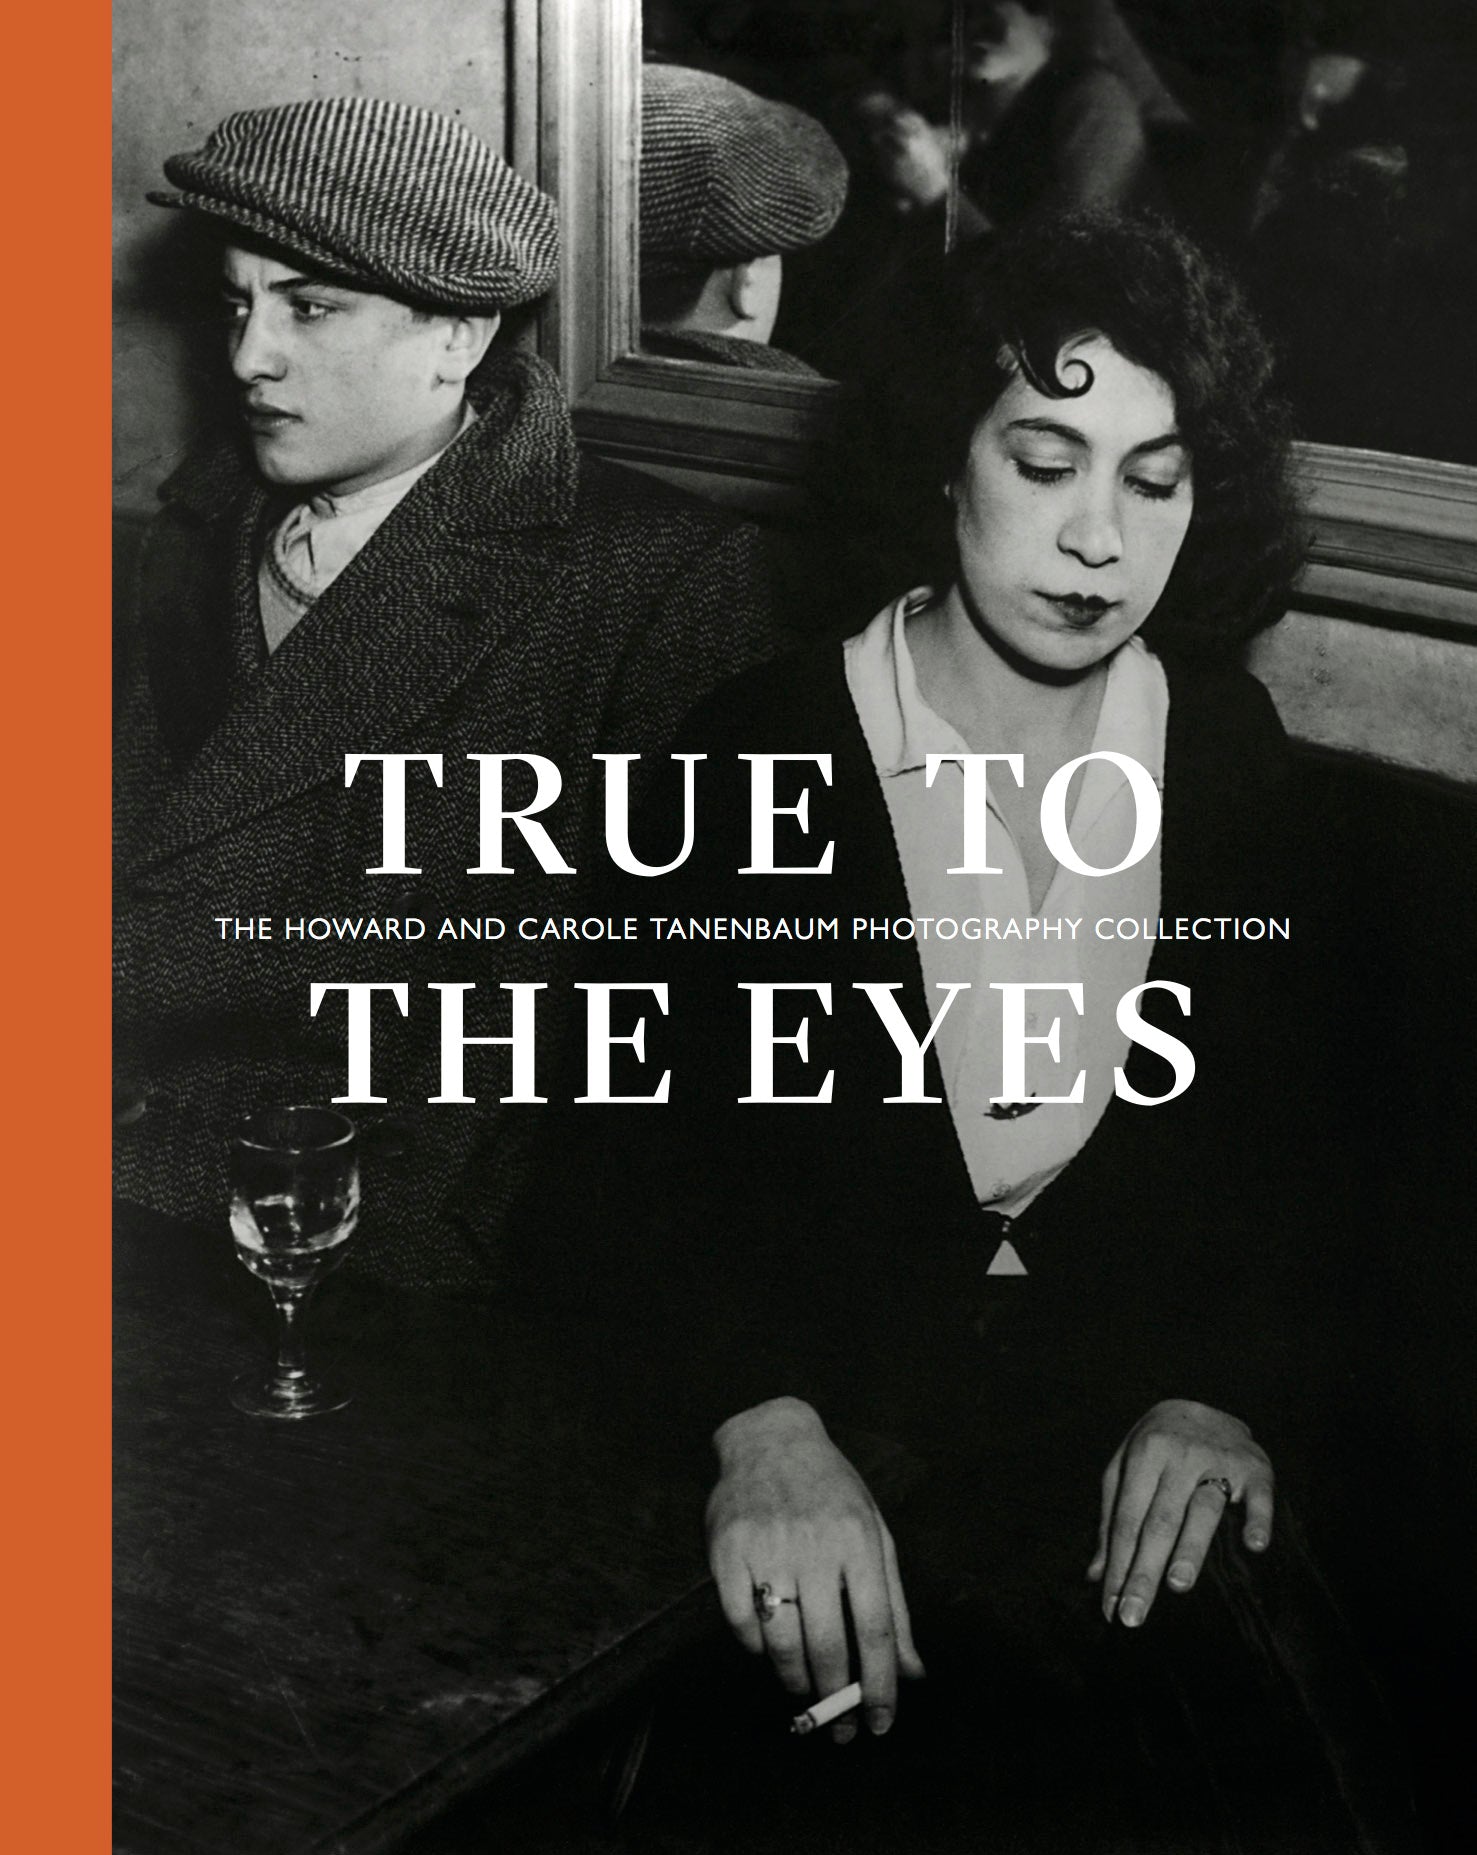 True to the Eyes: The Howard and Carole Tanenbaum Photography Collection